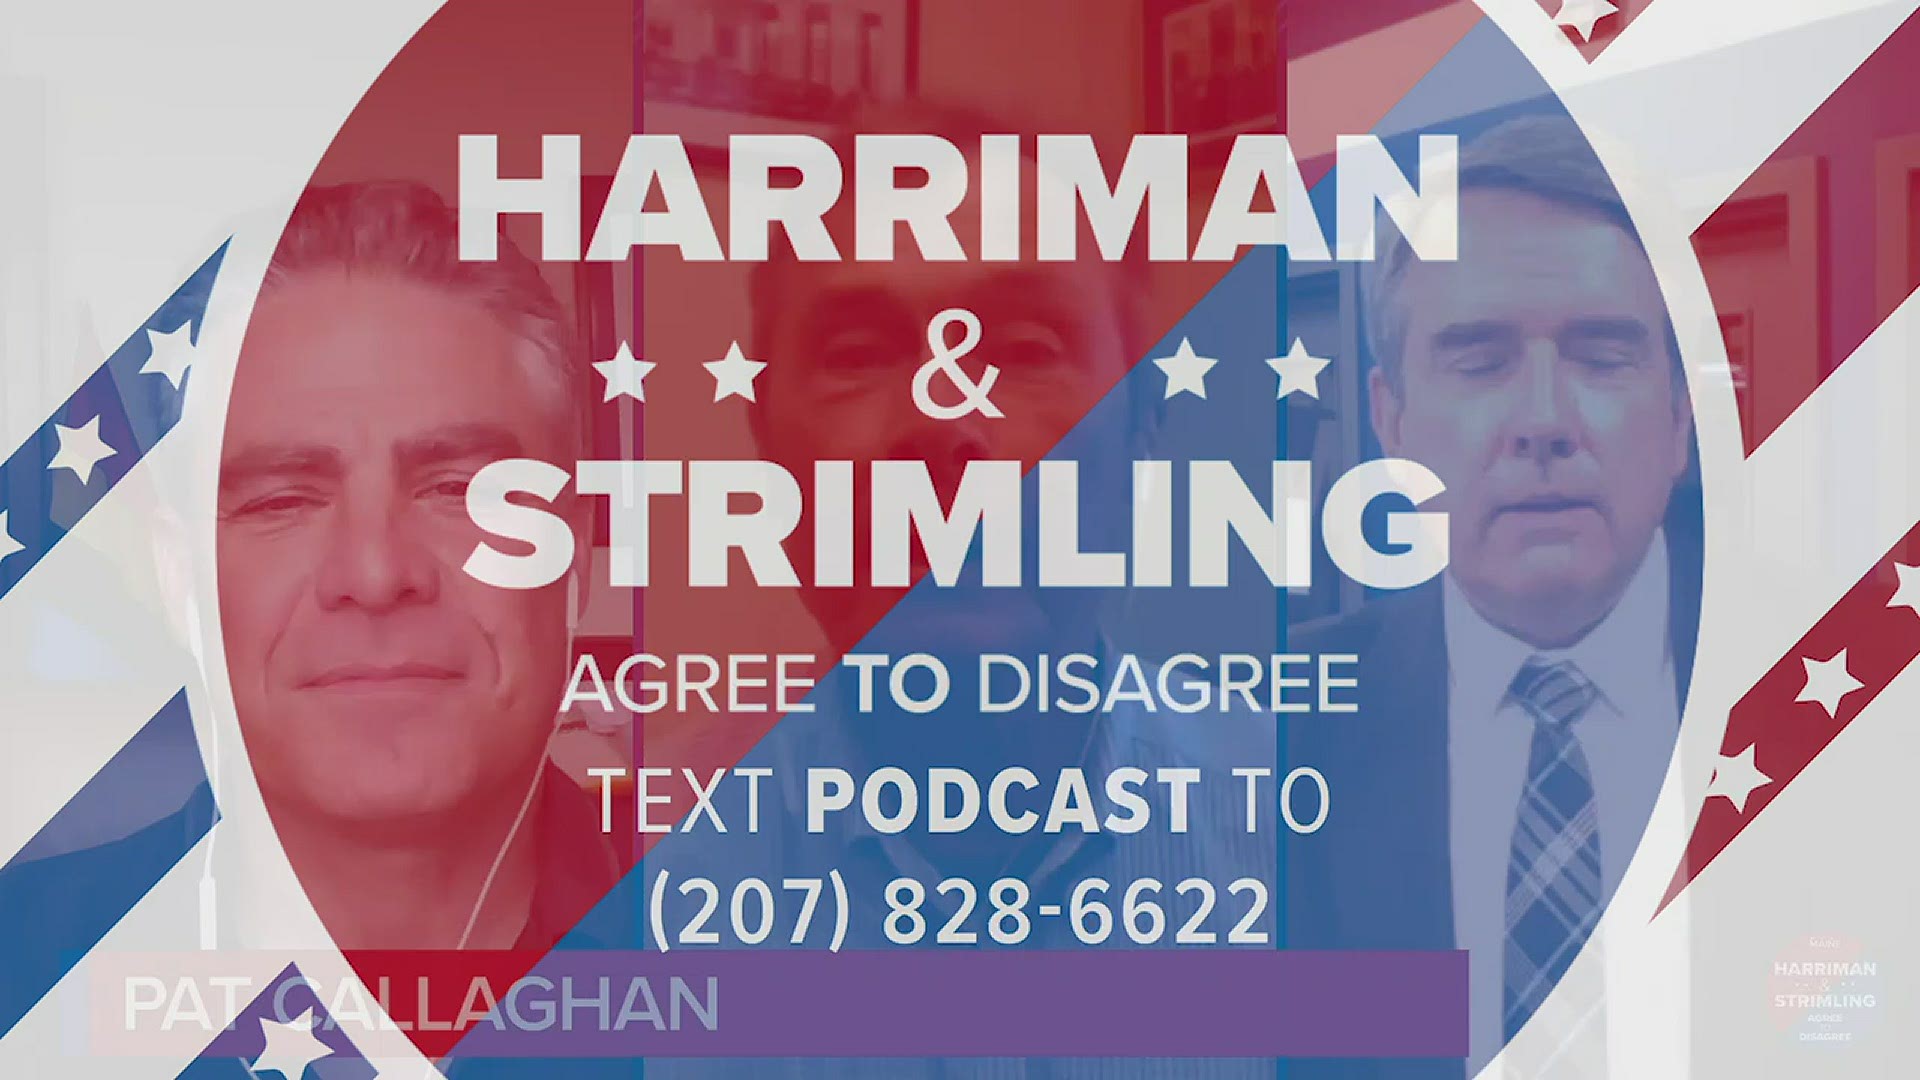 NEWS CENTER Maine's Pat Callaghan joins Phil Harriman and Ethan Strimling on Agree to Disagree podcast